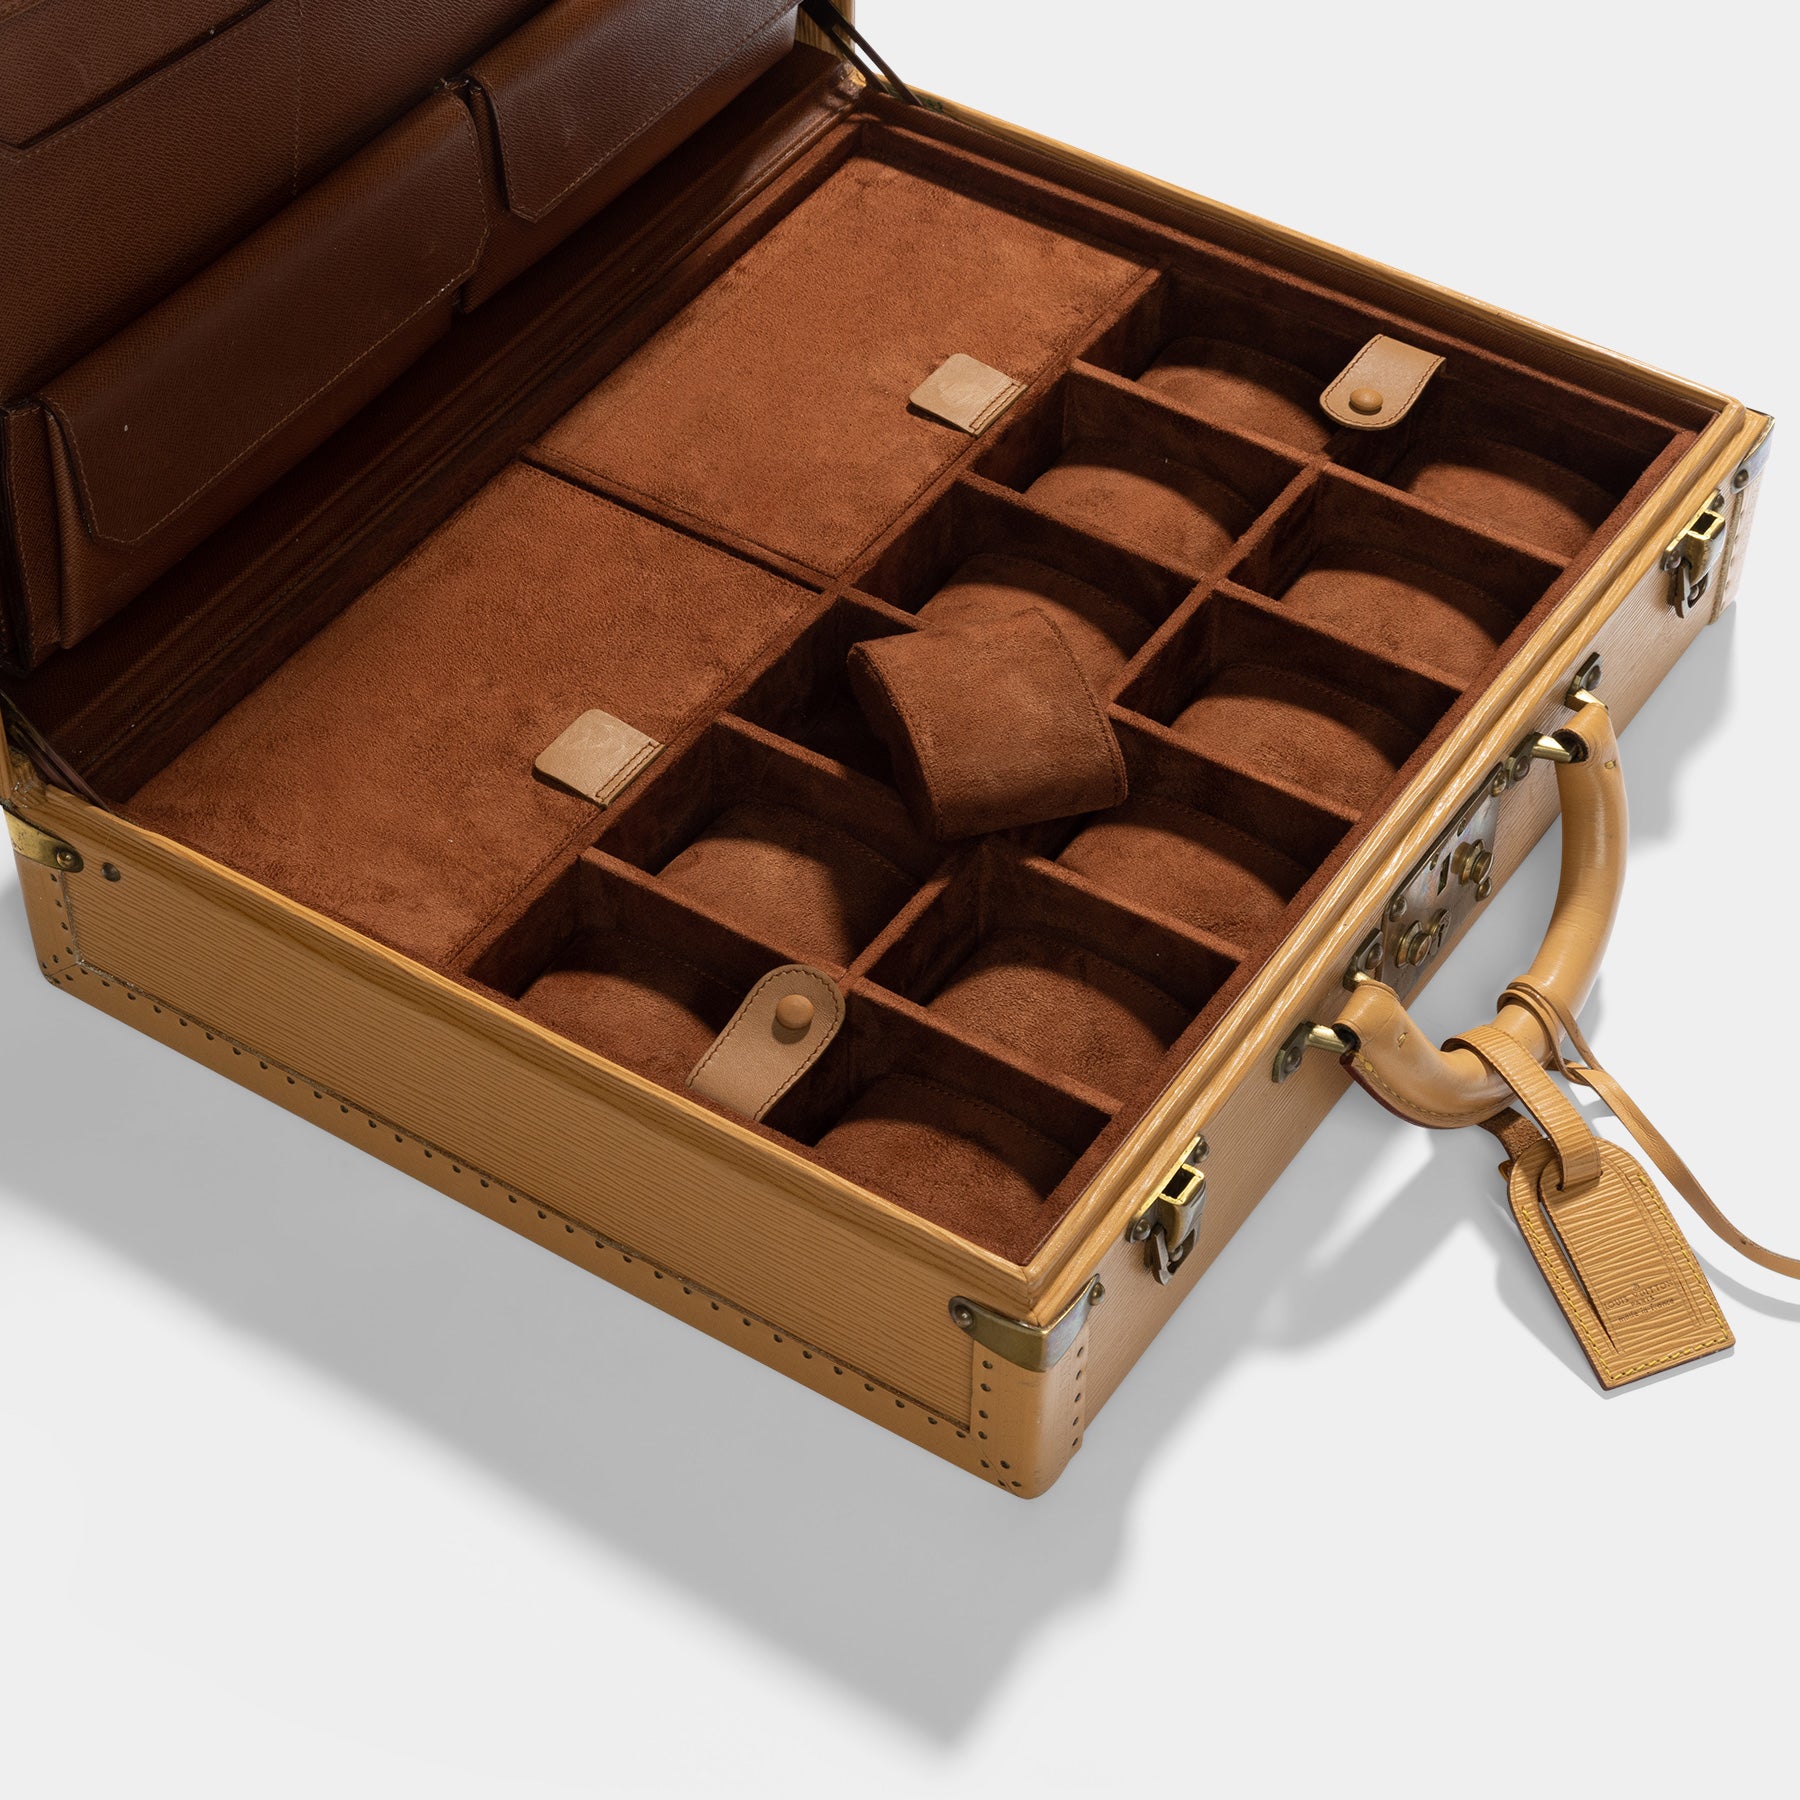 This leather suitcase from the Louis Vuitton brand is very refined